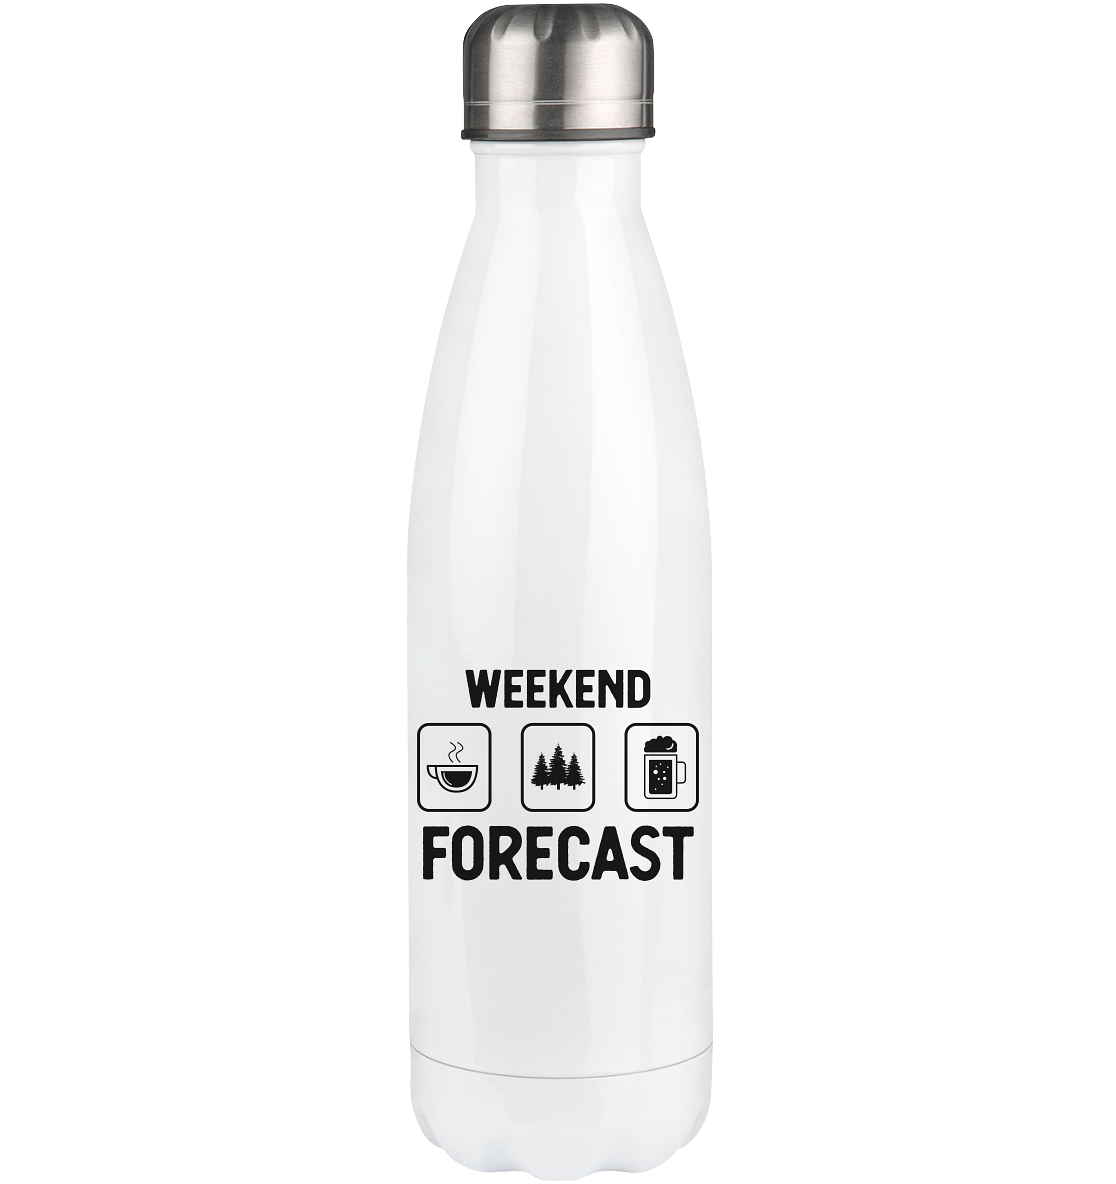 Weekend Forecast 3 - Edelstahl Thermosflasche camping 500ml